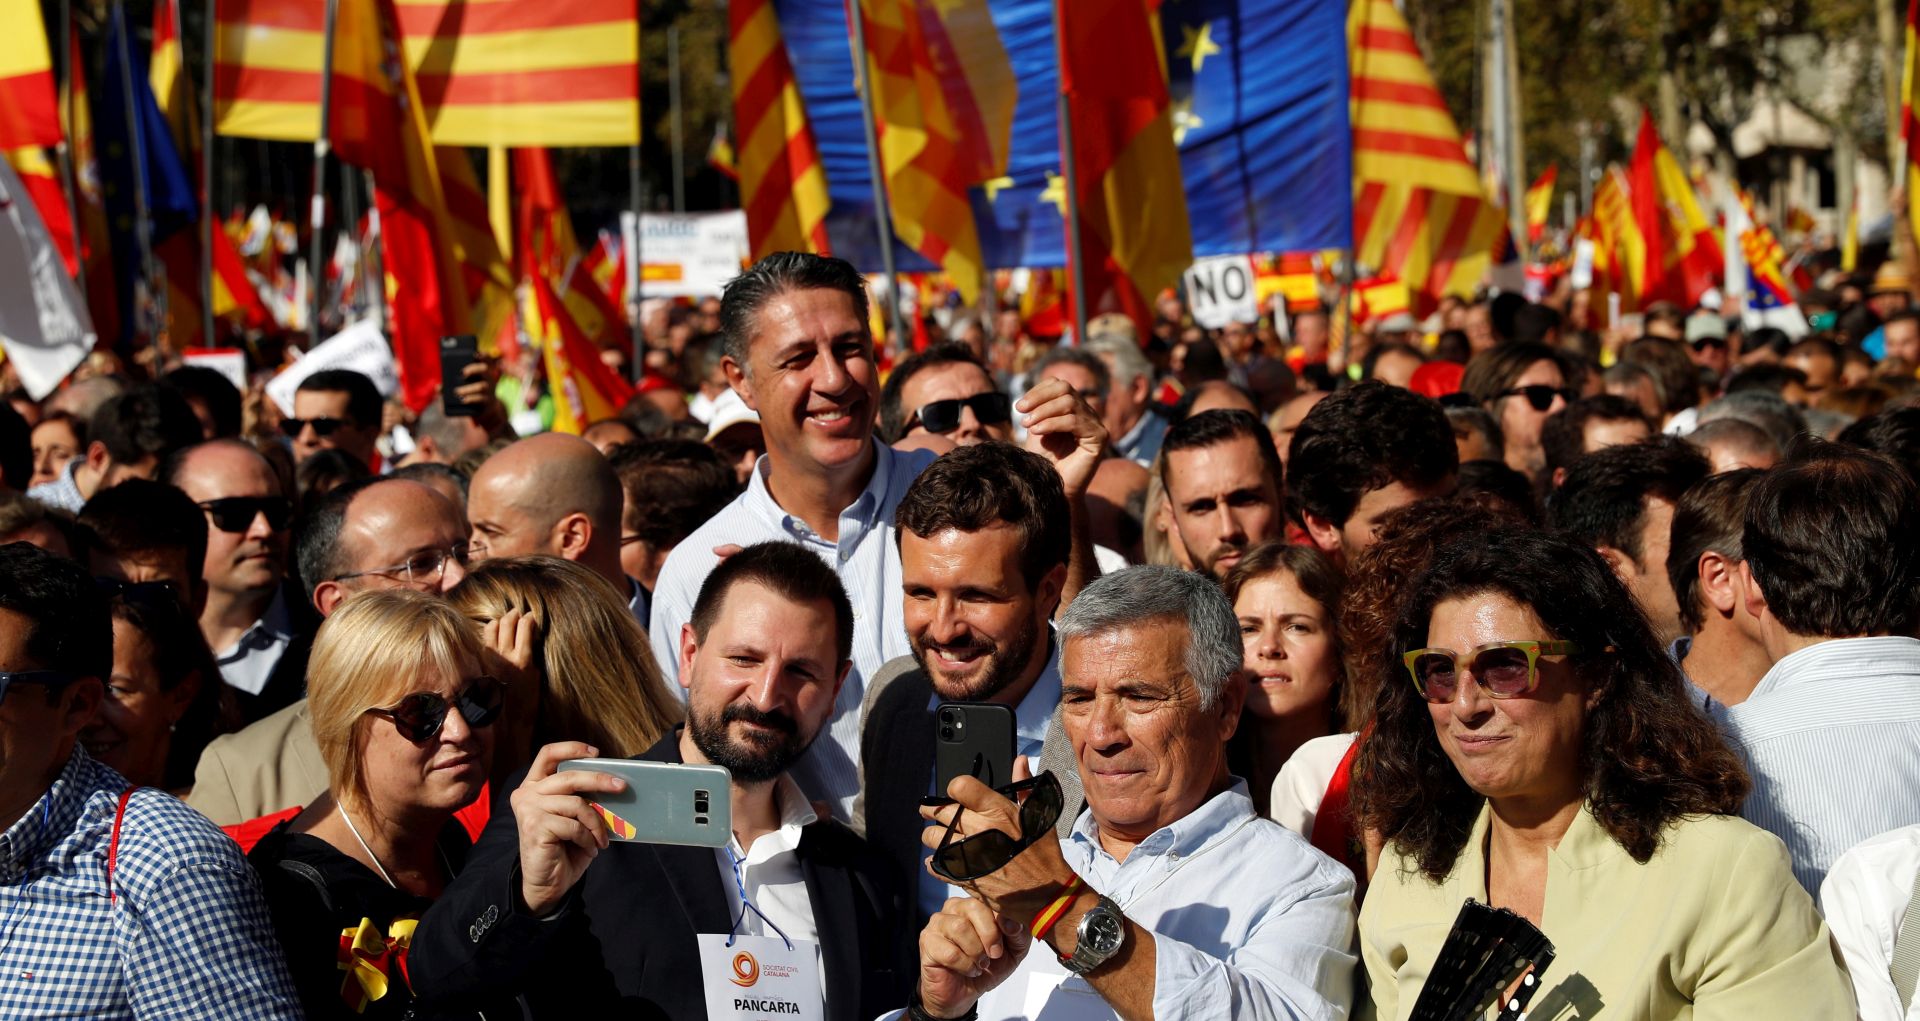 epa07953688 Spanis People's Party's leader Pablo Casado (C, with beard) poses for a selfie as thousands people attend rally against Catalan pro-independent process in downtown Barcelona, Catalonia, Spain, 27 October 2019. About thousand of demonstrators took part in the rally which was organized by the pro-Spain Catalan group Societat Civil Catalana (Catalan Civil Society).  EPA/TONI ALBIR